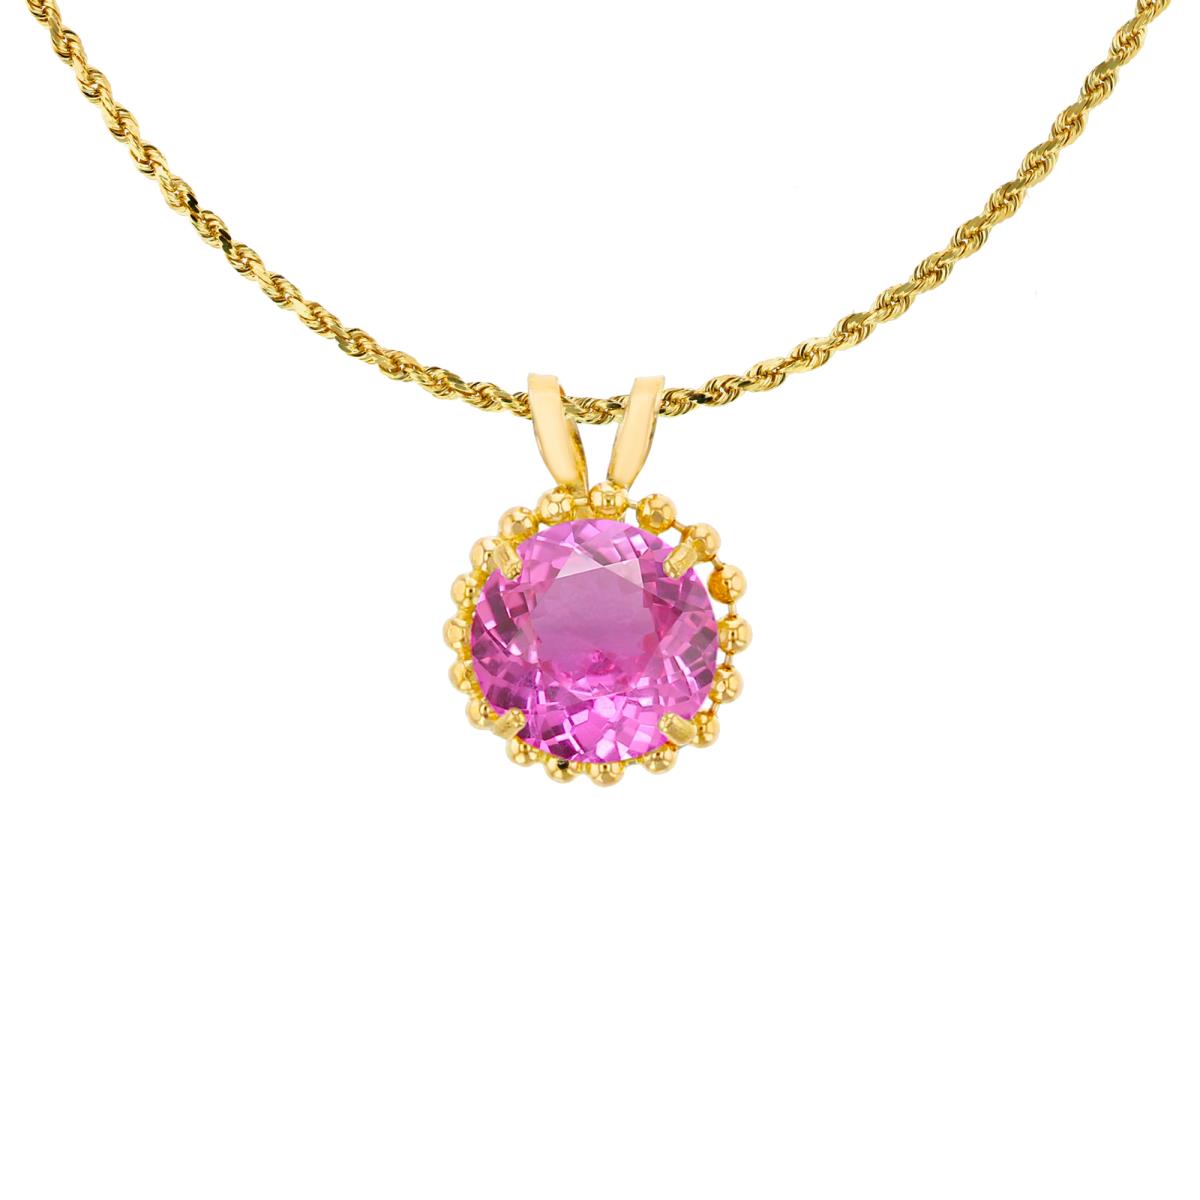 14K Yellow Gold 6mm Rd Cut Created Pink Sapphire with Bead Frame Rabbit Ear 18" Necklace